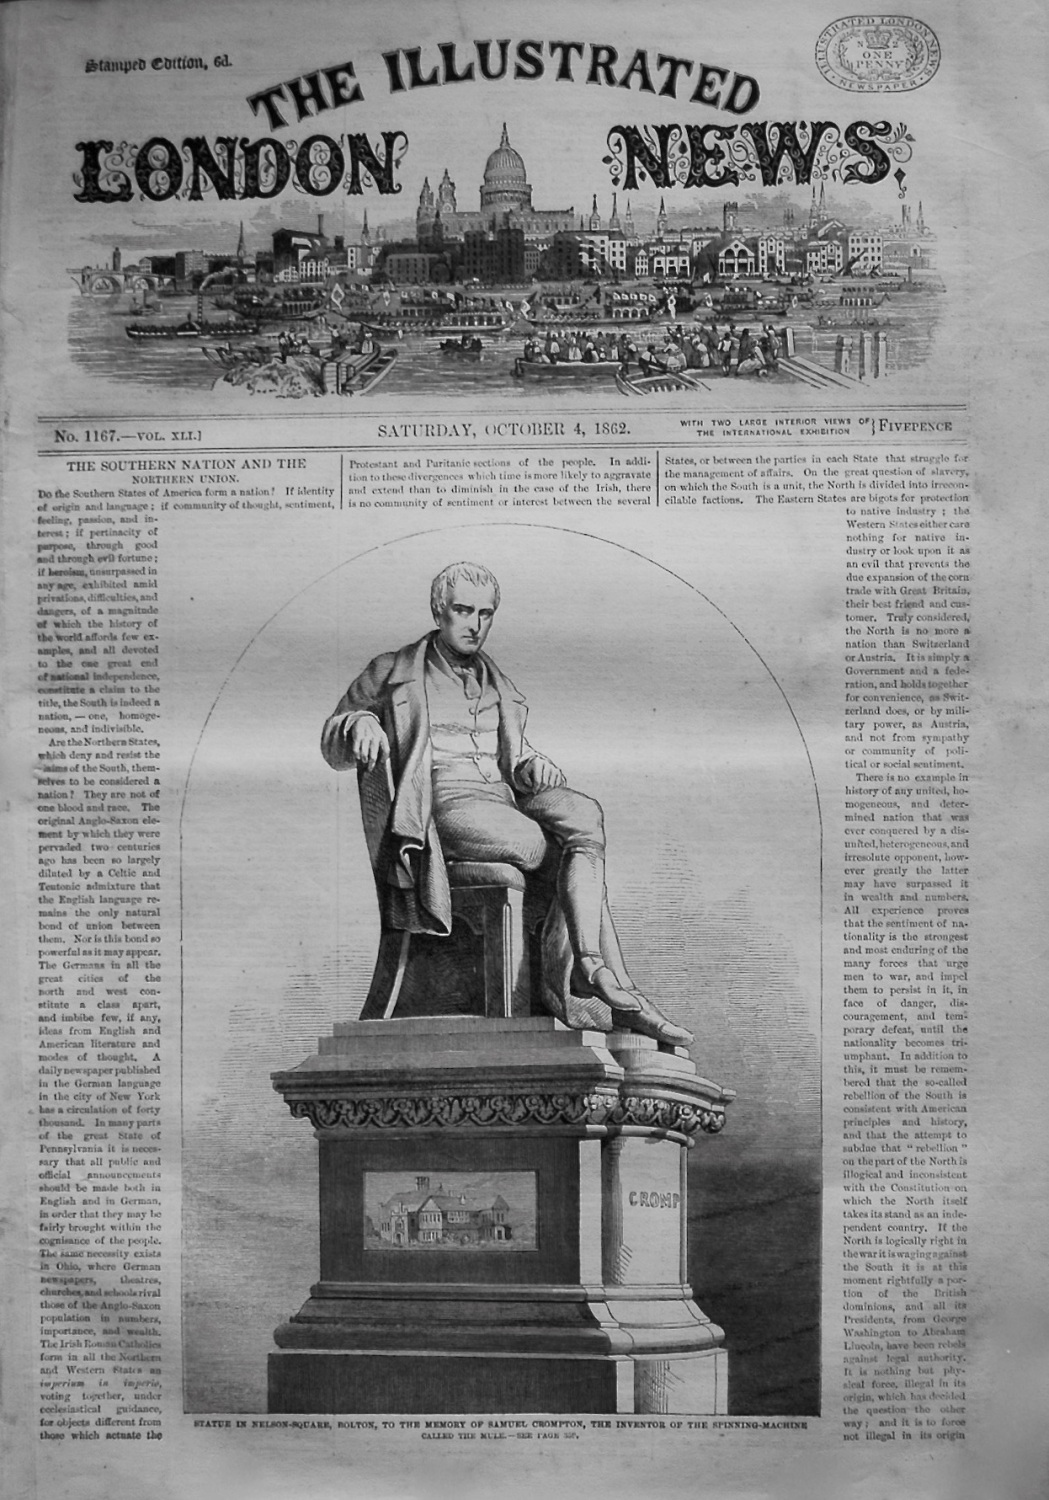 Illustrated London News. October 4th, 1862.